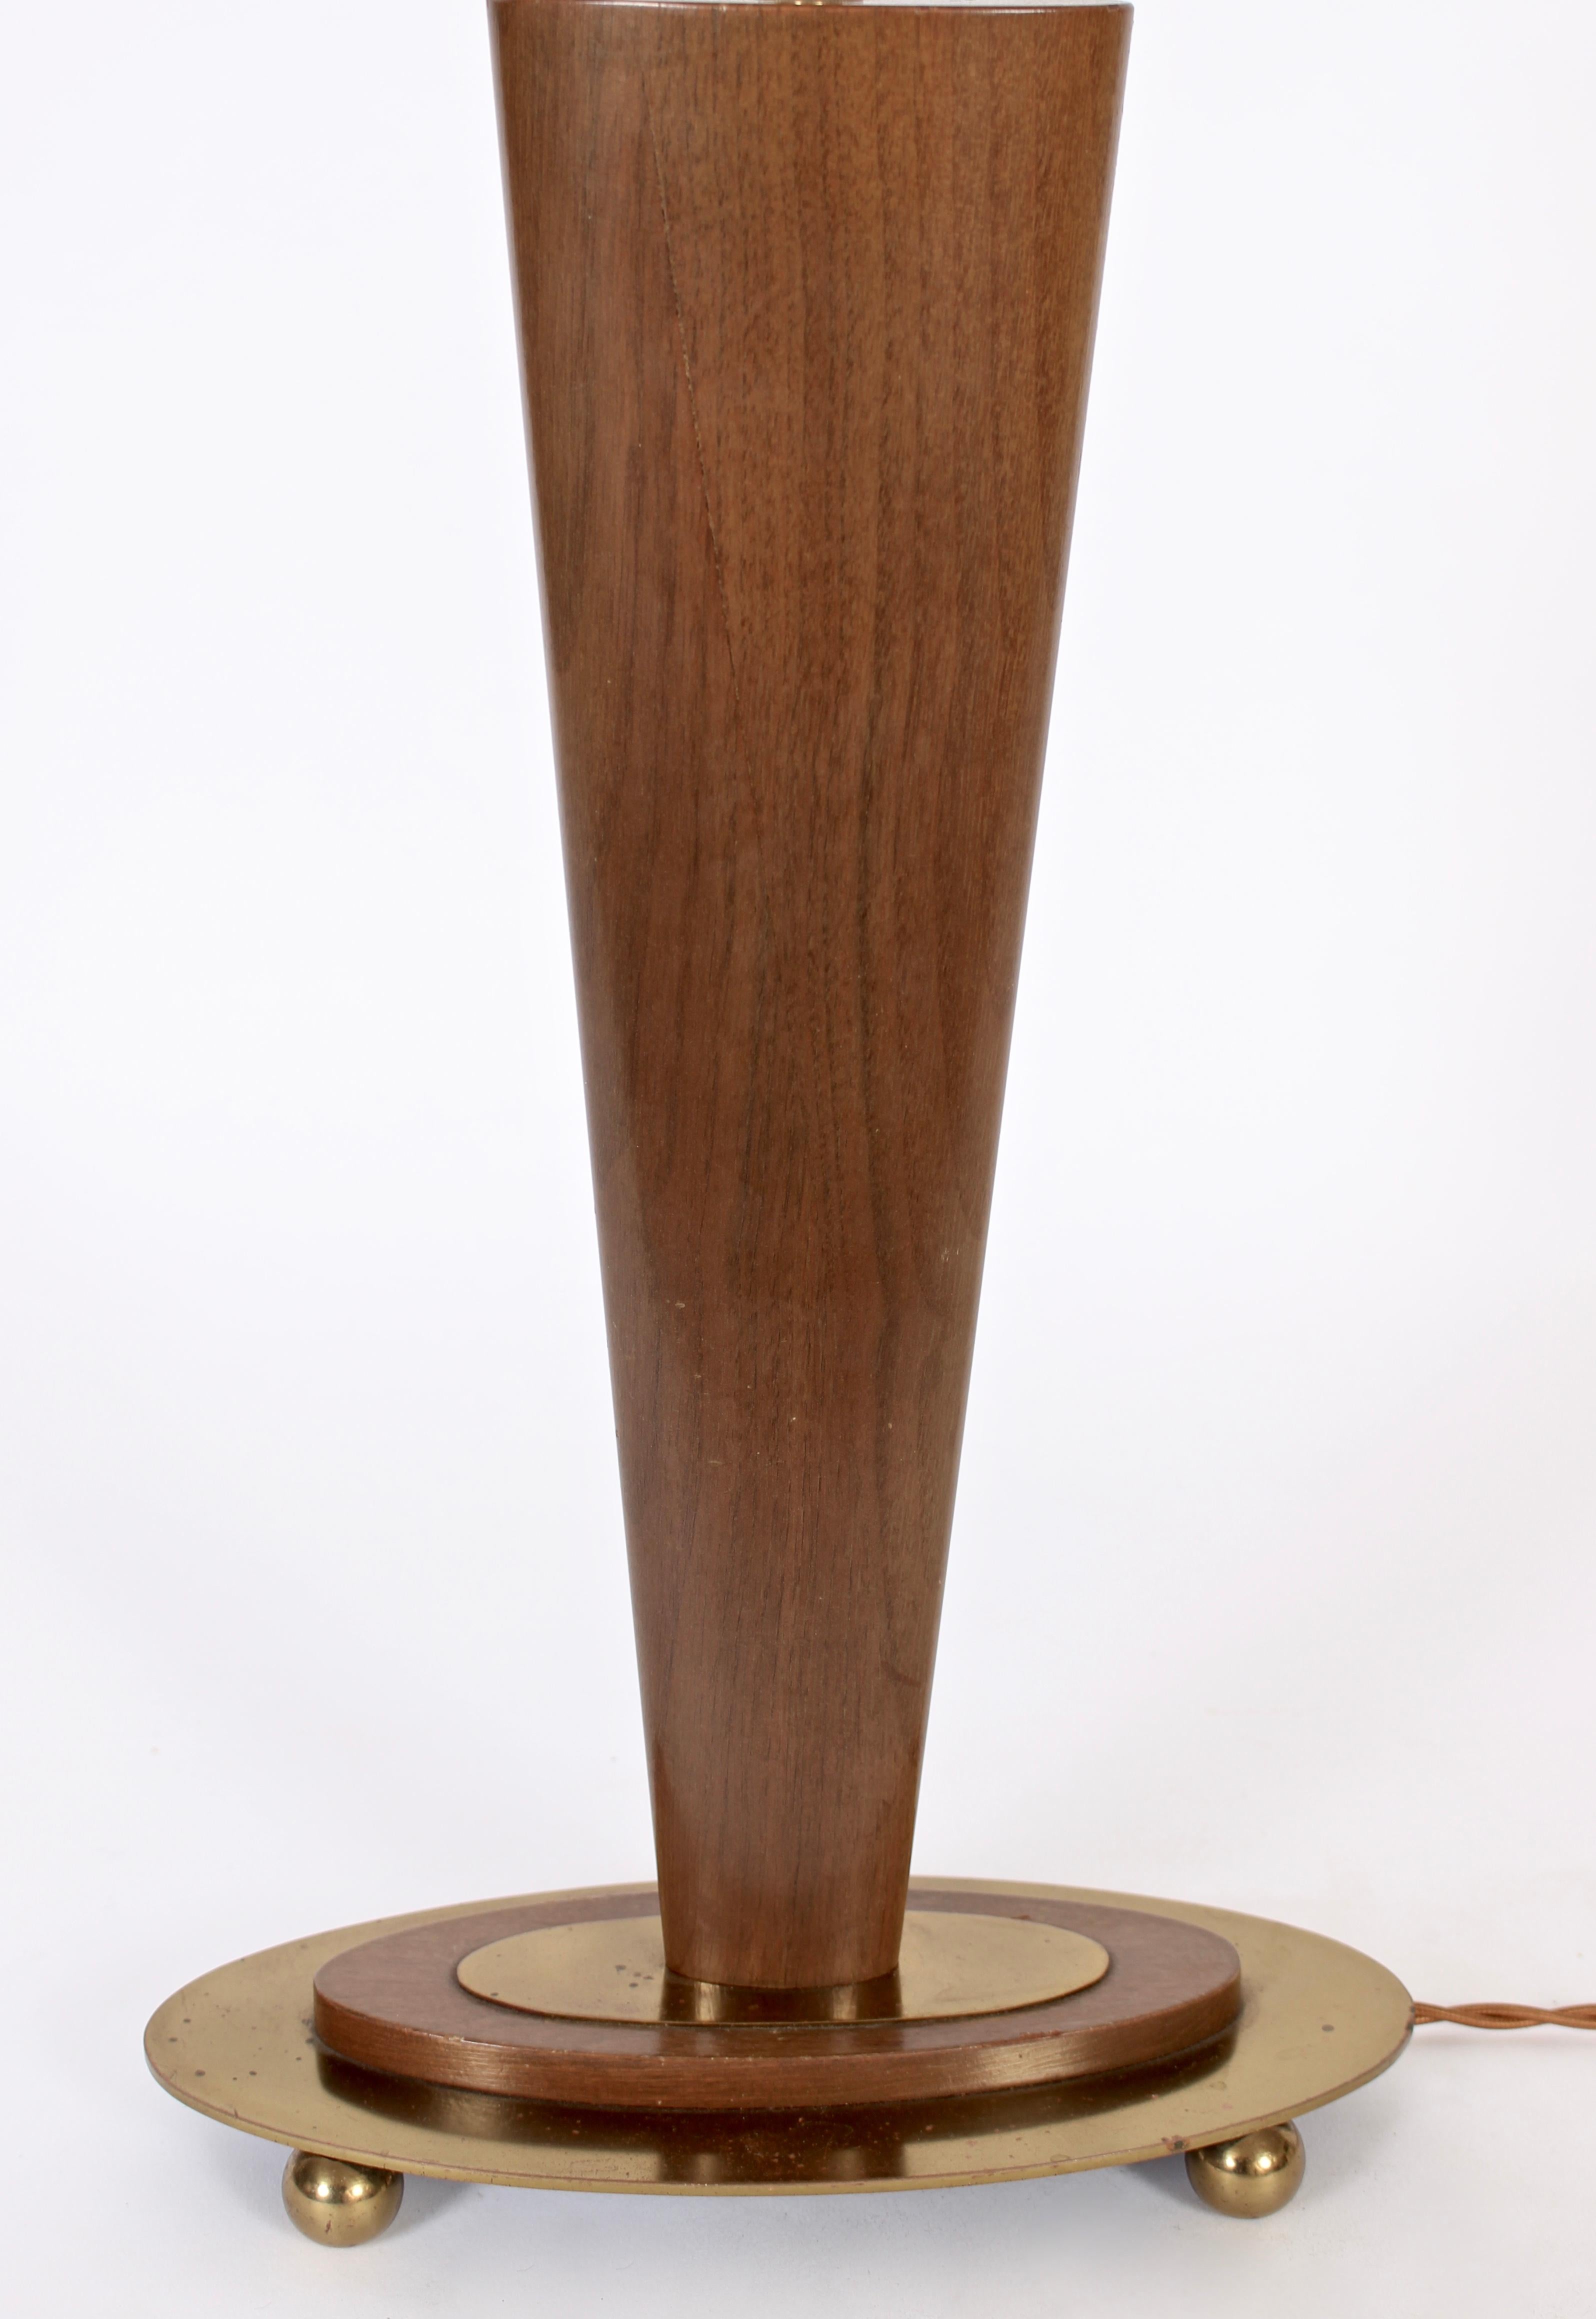 Plated Tall Mutual Sunset Walnut & Brass Table Lamp on Footed Oval Base, 1950s For Sale